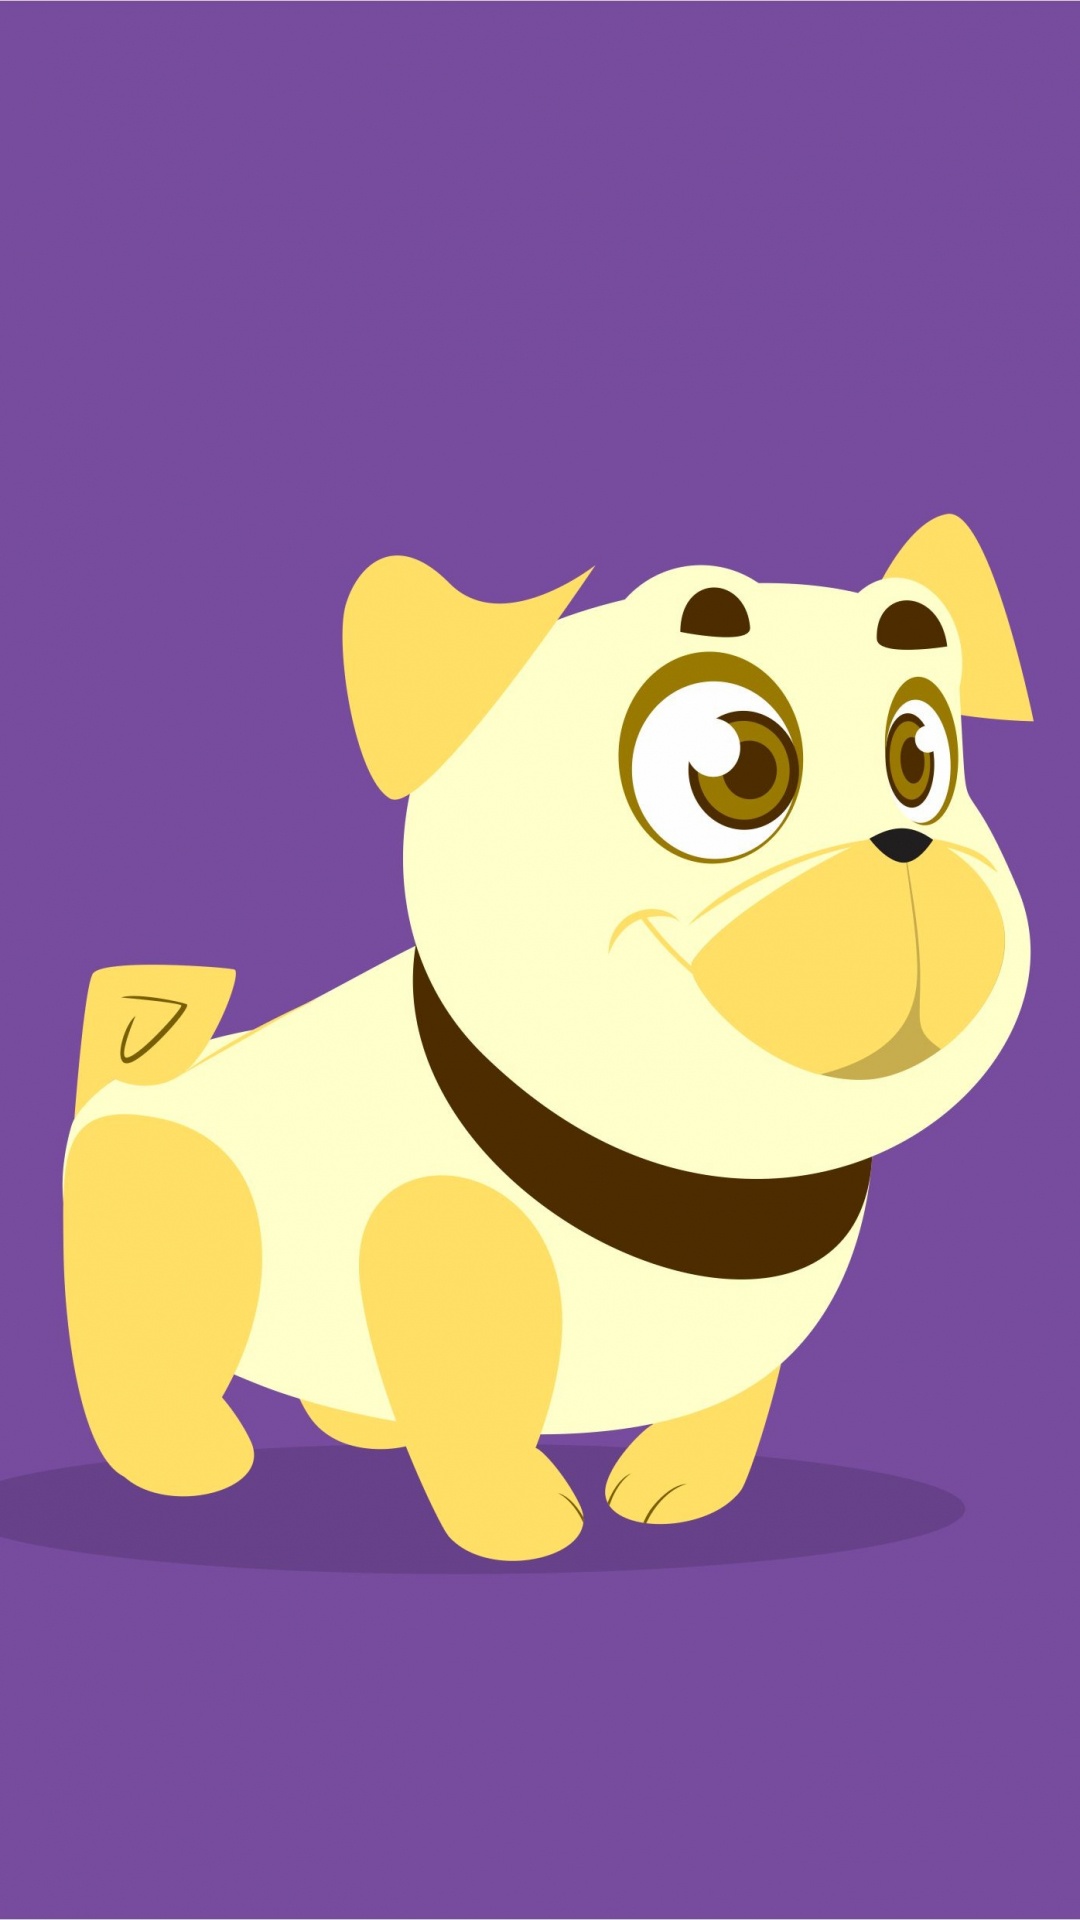 Yellow and Brown Dog Cartoon Character. Wallpaper in 1080x1920 Resolution